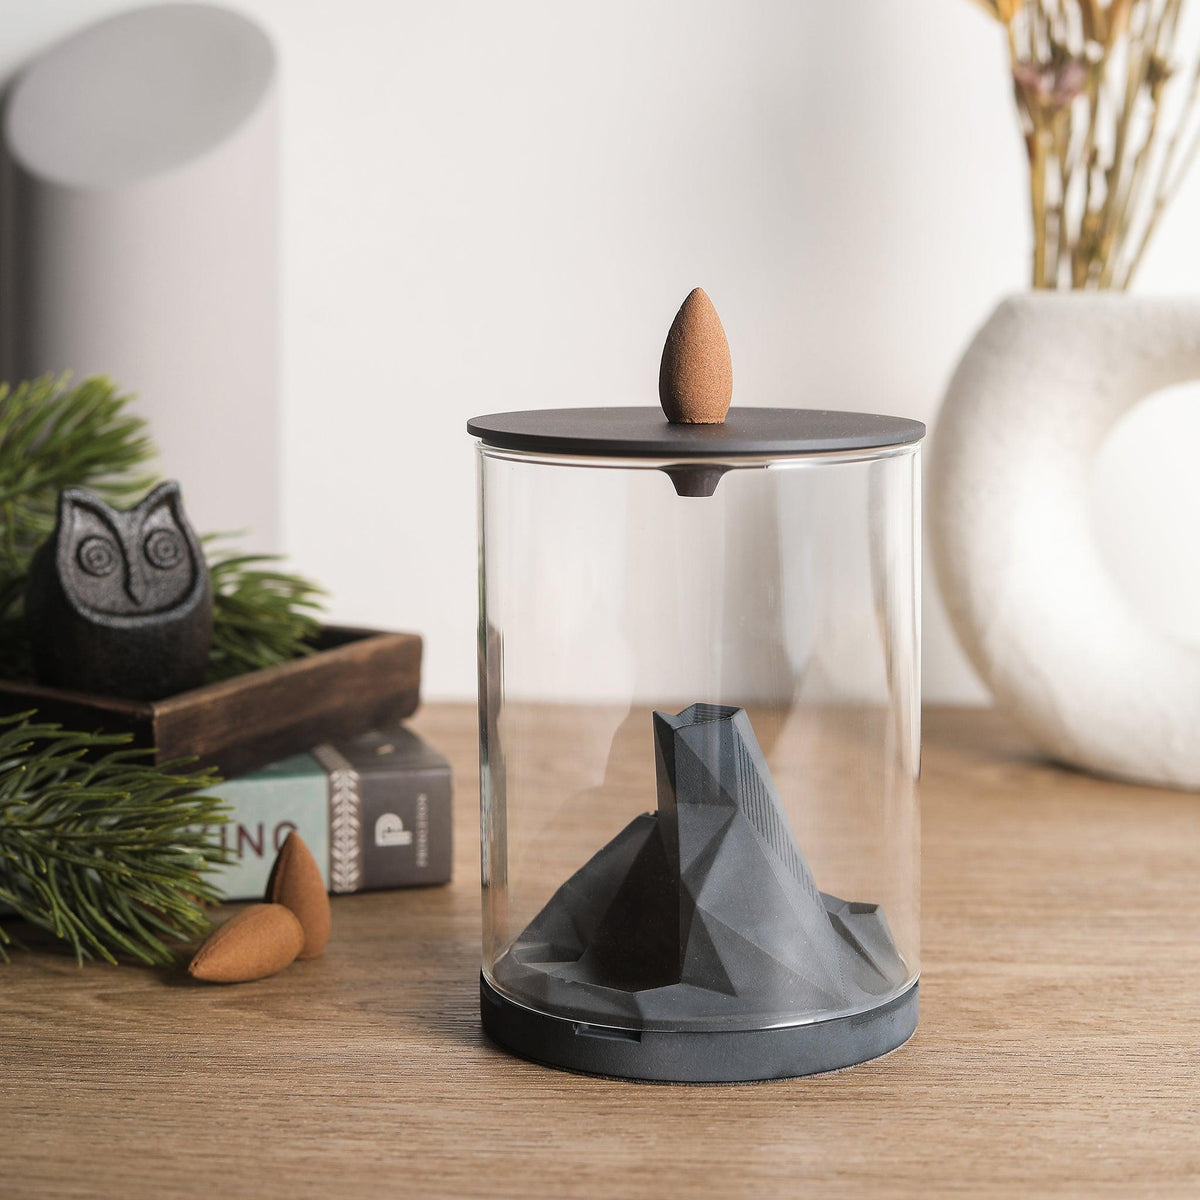 Caldera Terrarium Incense Fountain by Kin Objects on Table next to other Decor